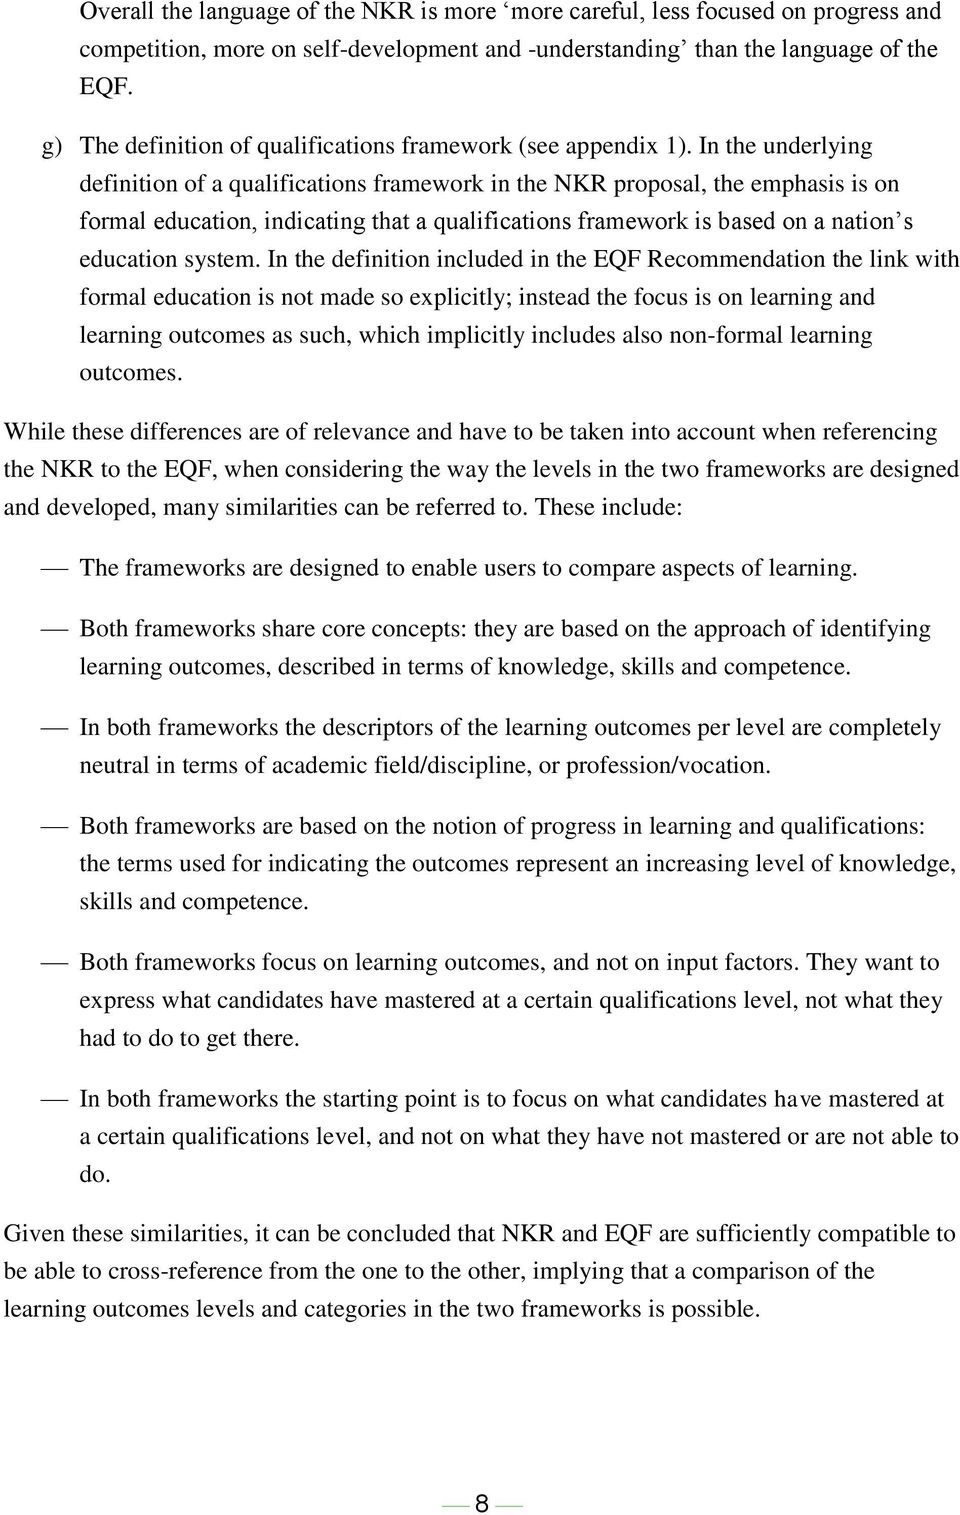 In the underlying definition of a qualifications framework in the NKR proposal, the emphasis is on formal education, indicating that a qualifications framework is based on a nation s education system.